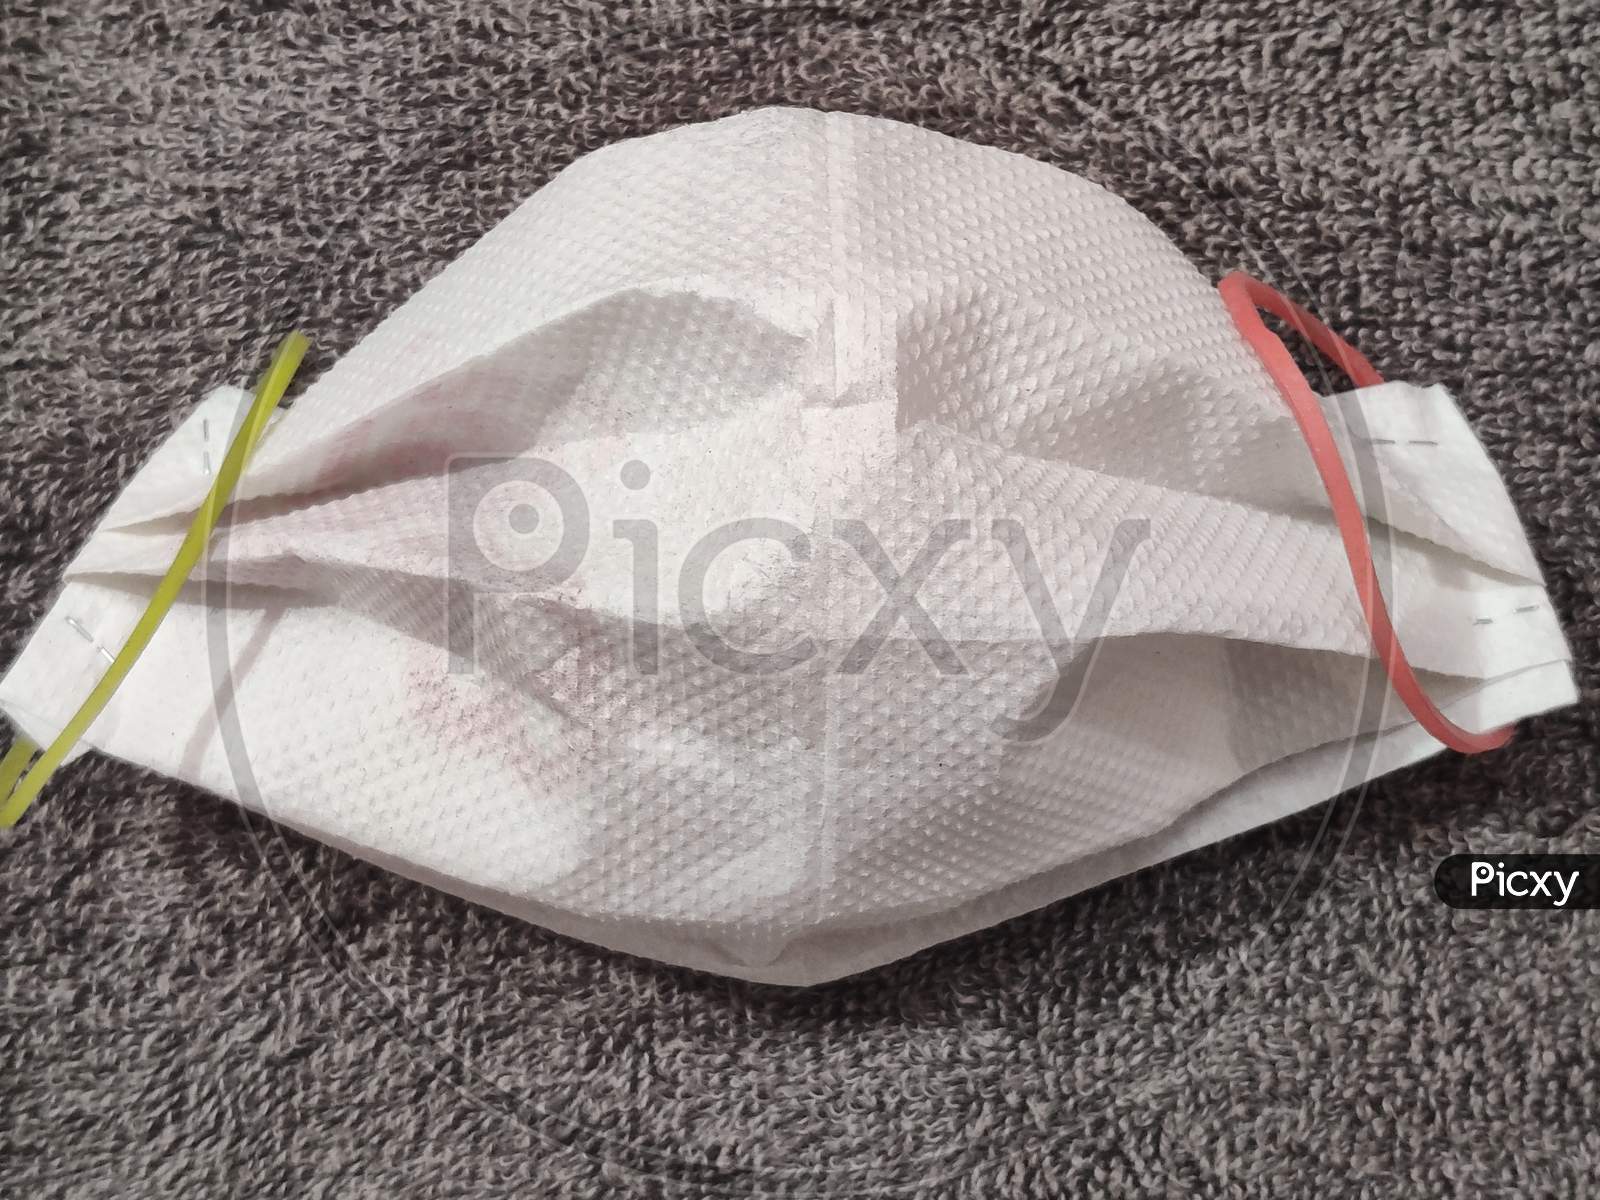 COVID-19 pandemic. antiviral medical paper mask for protection against corona virus